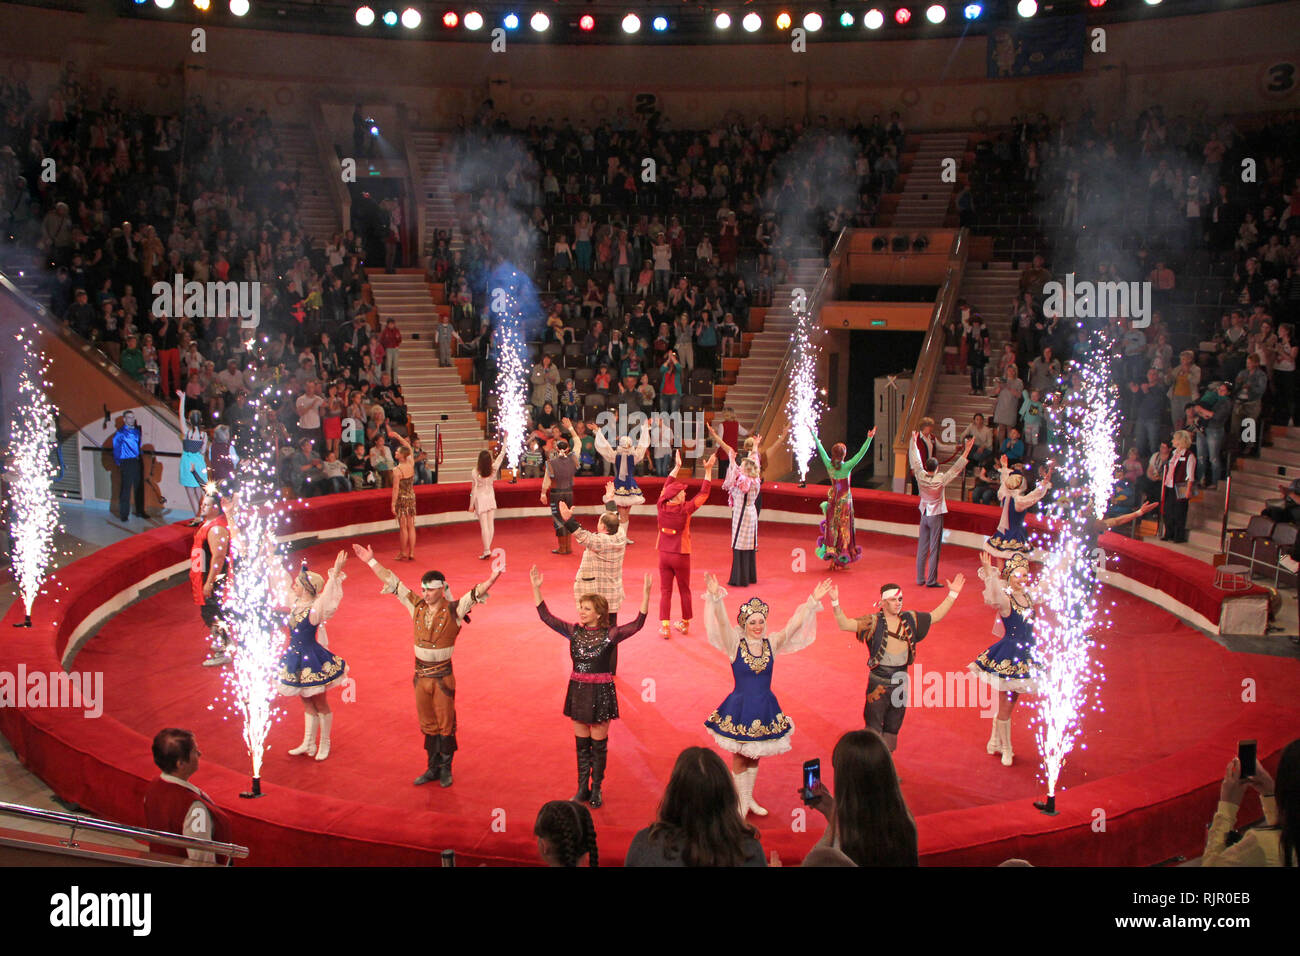 Final performance of all actors with fireworks. Actors in circus arena Stock Photo